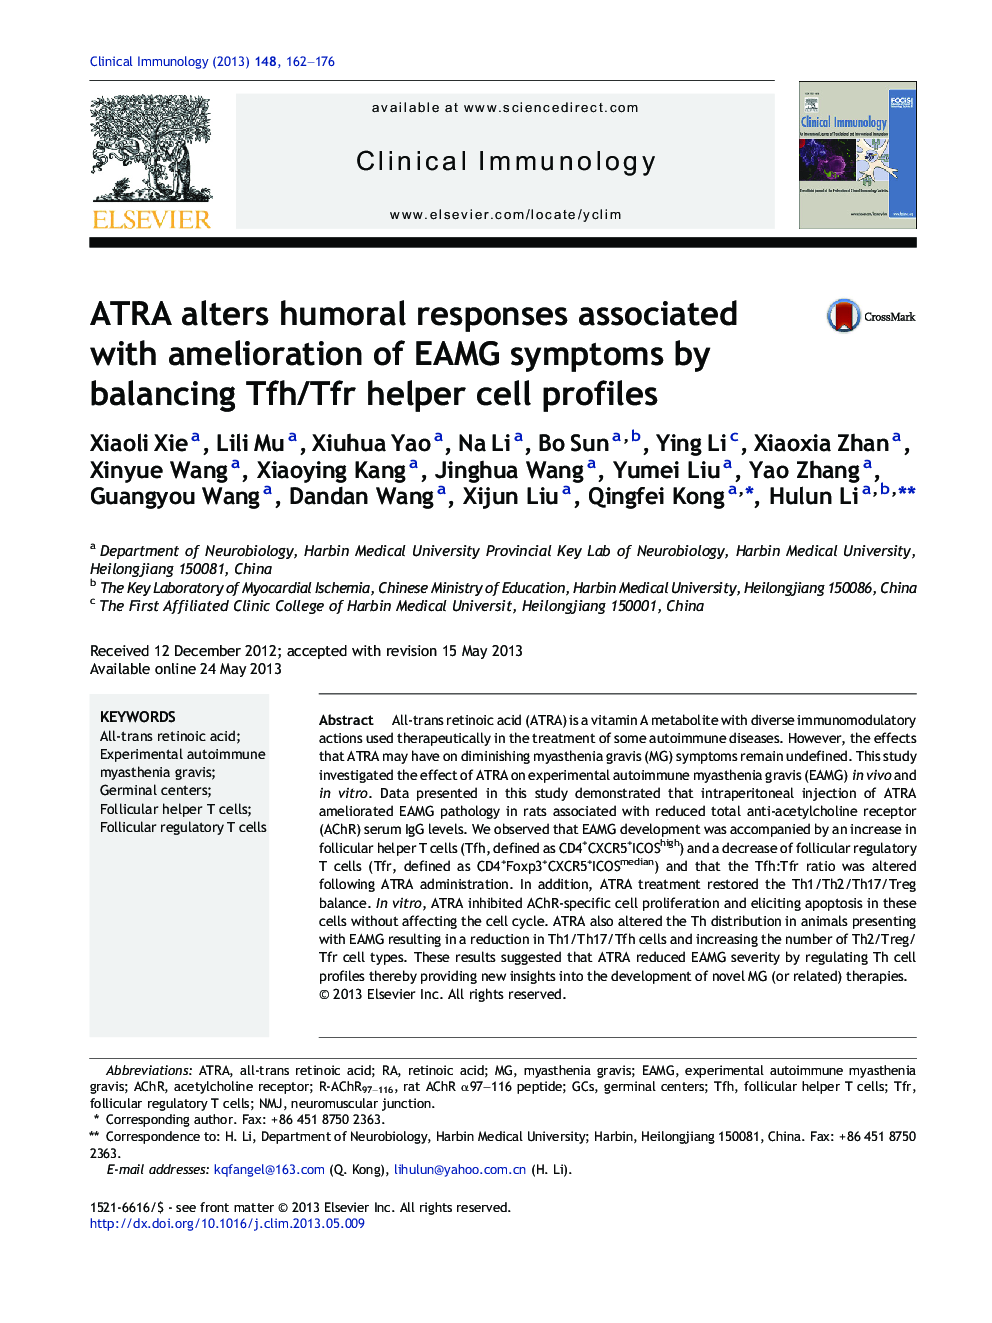 ATRA alters humoral responses associated with amelioration of EAMG symptoms by balancing Tfh/Tfr helper cell profiles